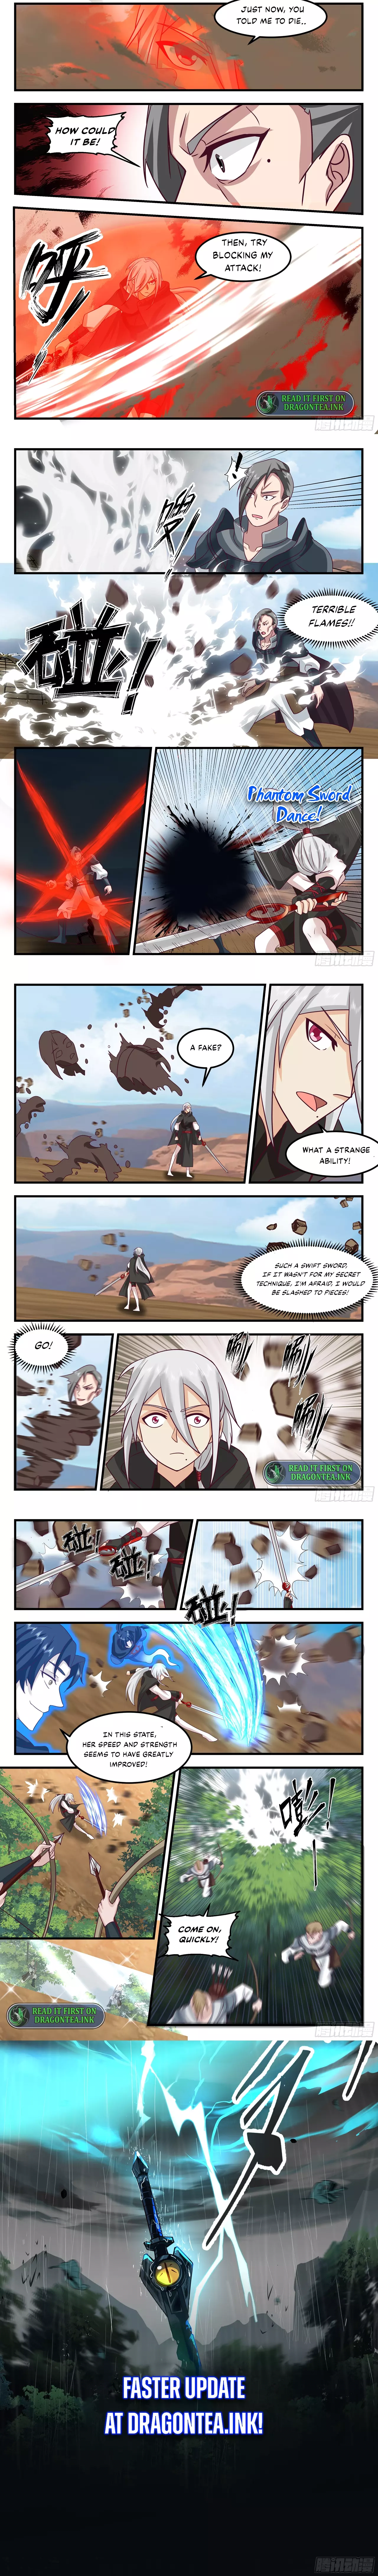 Killing Evolution From A Sword - Page 4